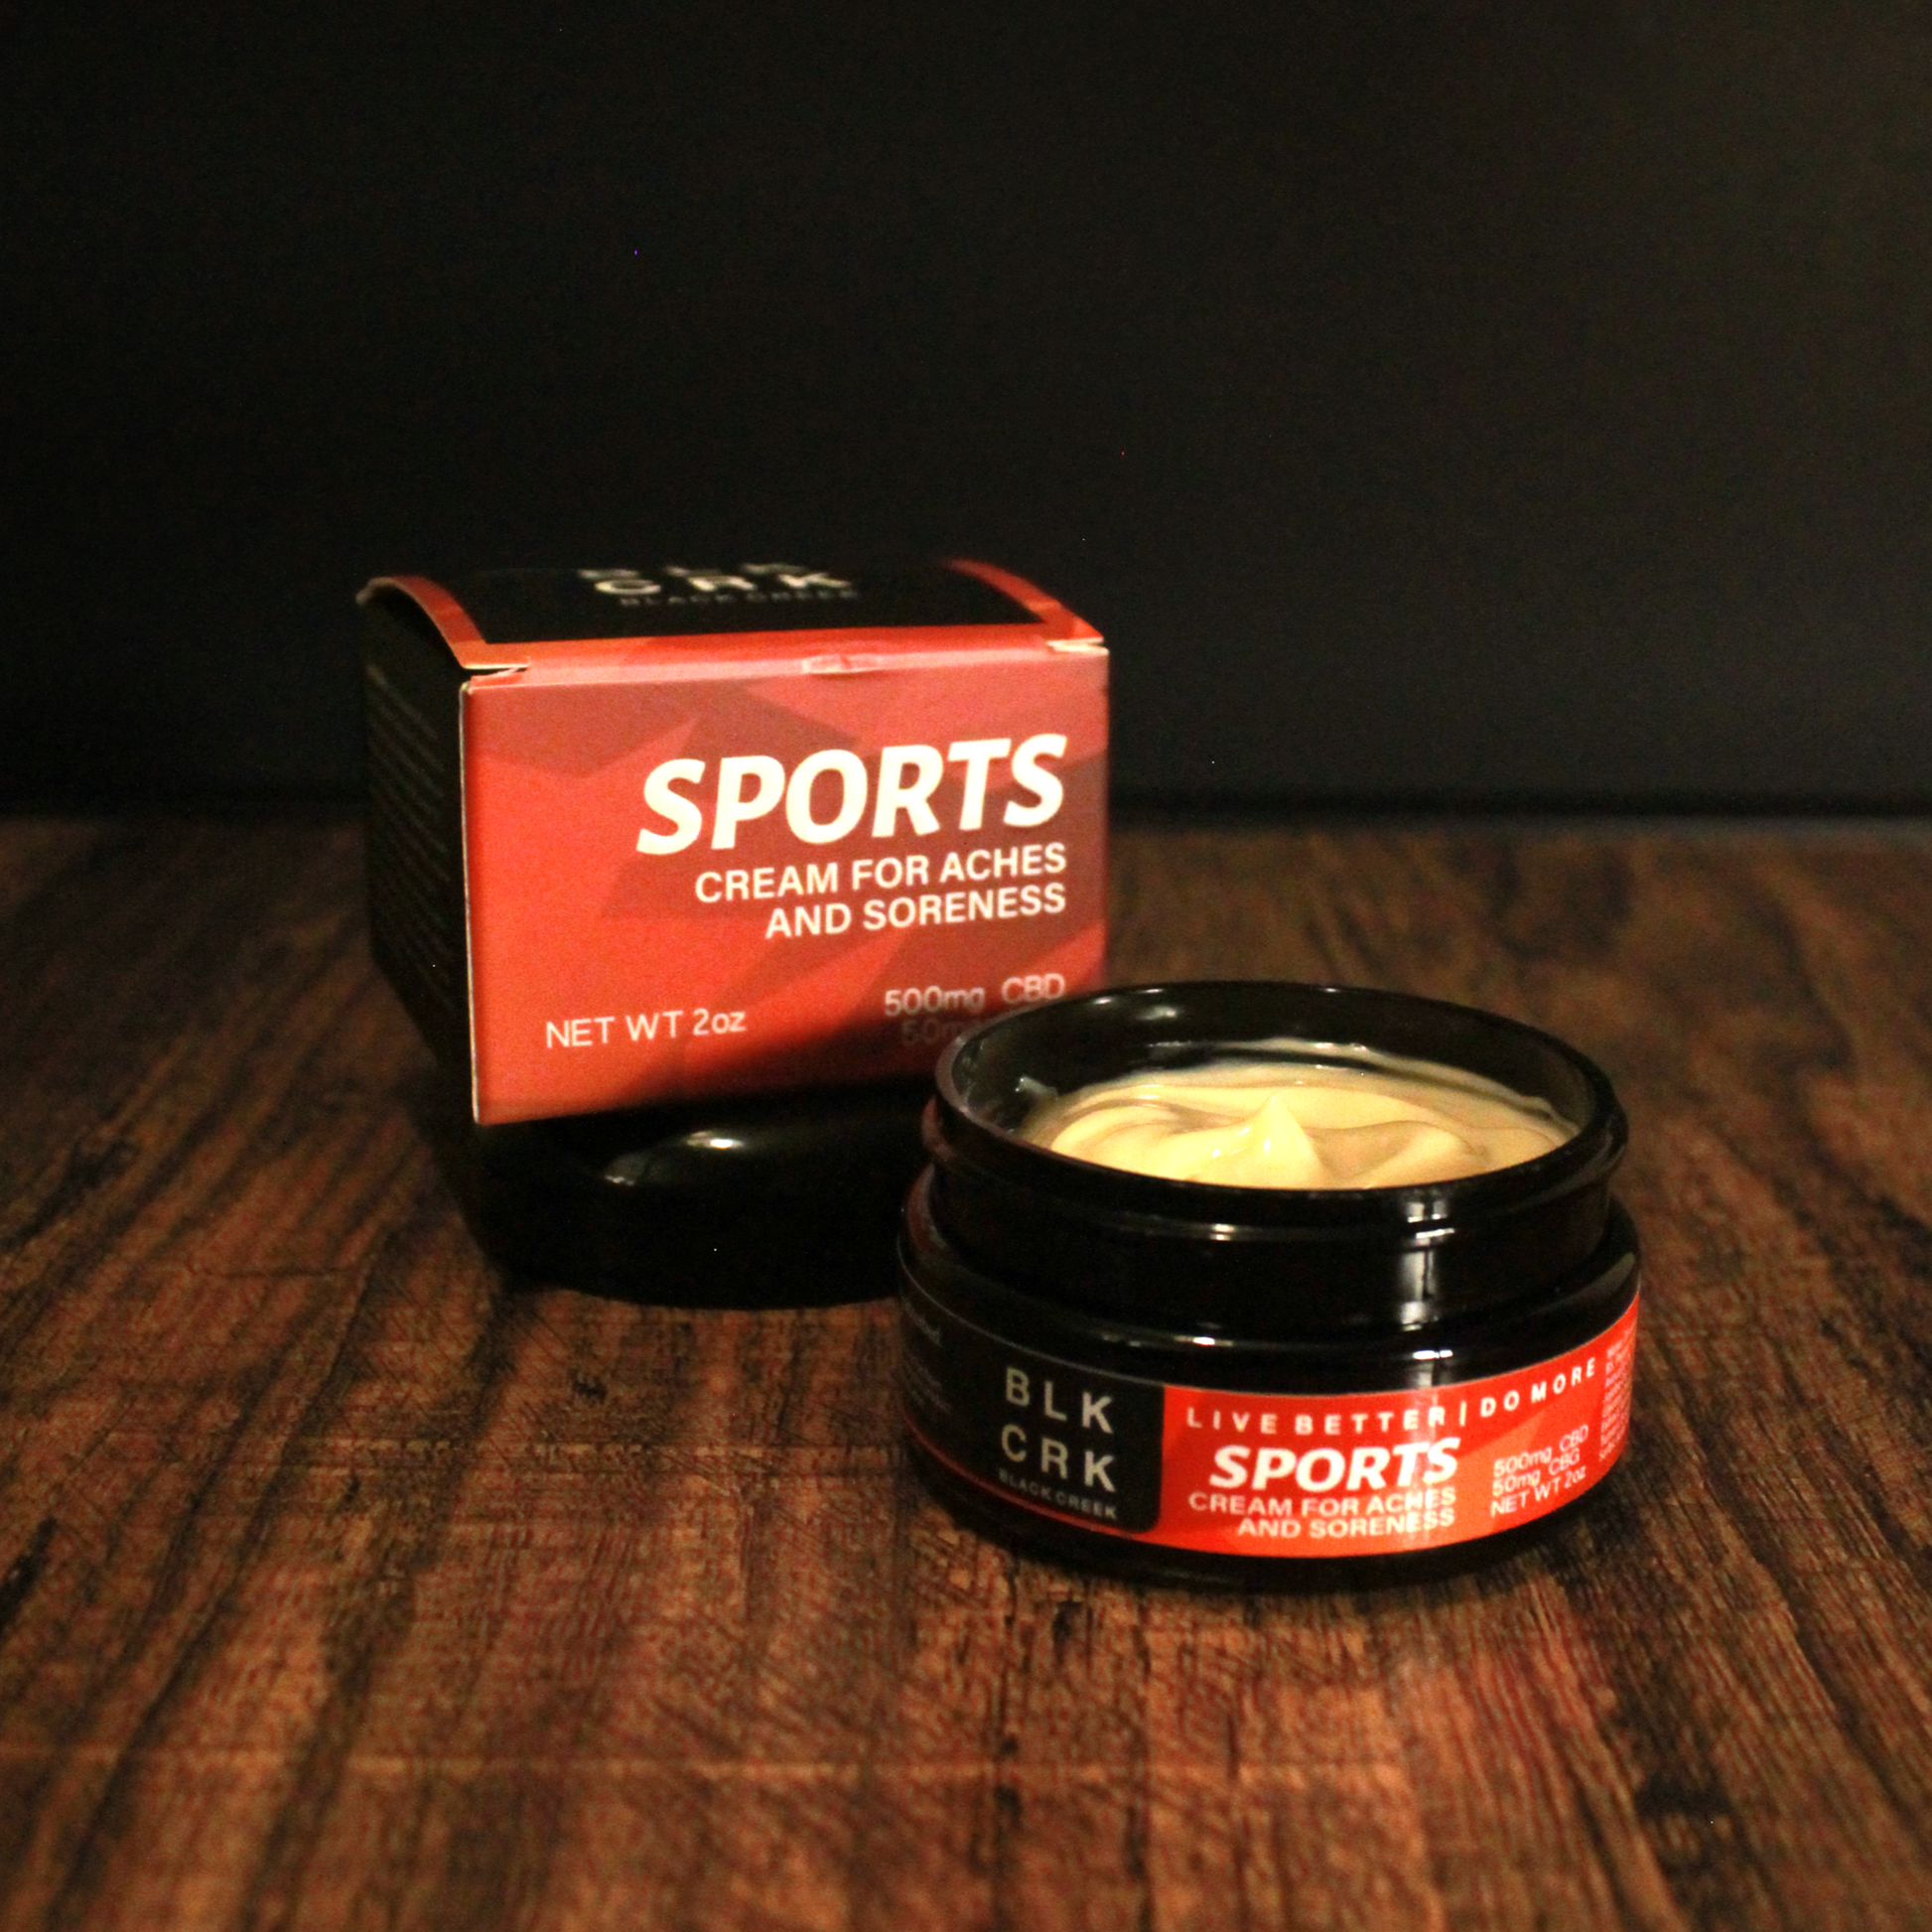 Black Creek CBD Sports cream with its box sitting on a wooden surface, black background